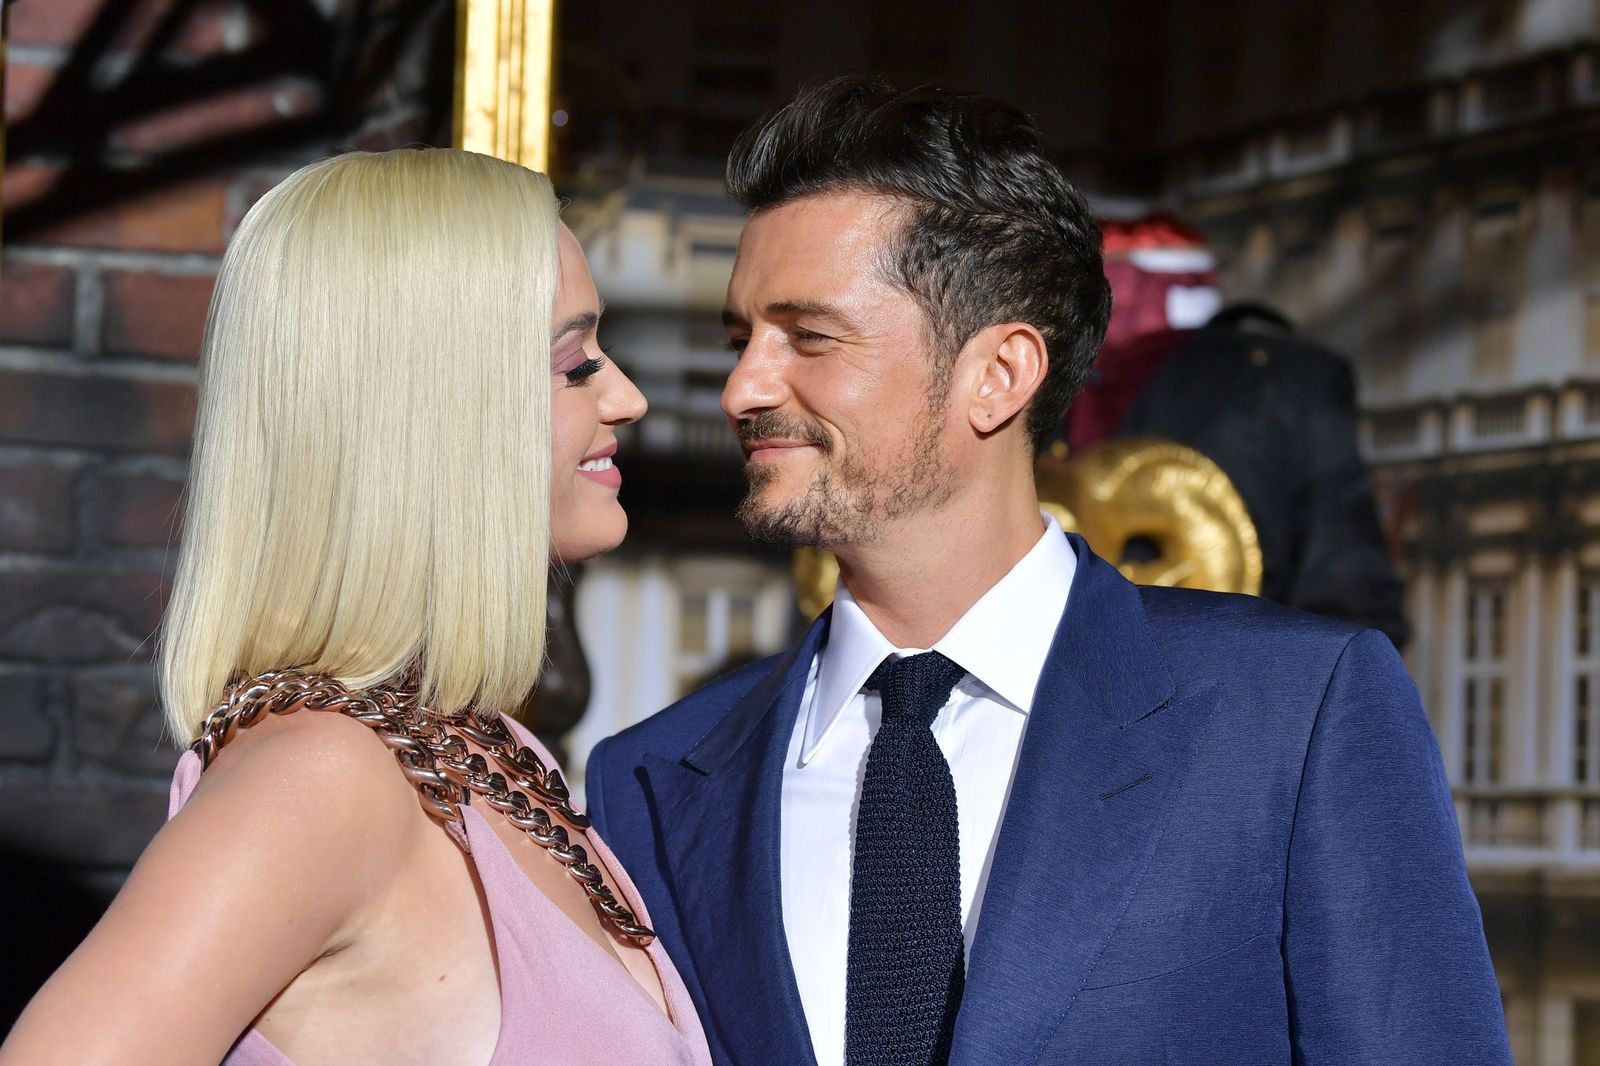 Katy Perry and Orlando Bloom at the Los Angeles premiere of the "Carnival Row" at TCL Chinese Theatre on August 21, 2019, in Hollywood, California | Photo: Amy Sussman/FilmMagic/Getty Images